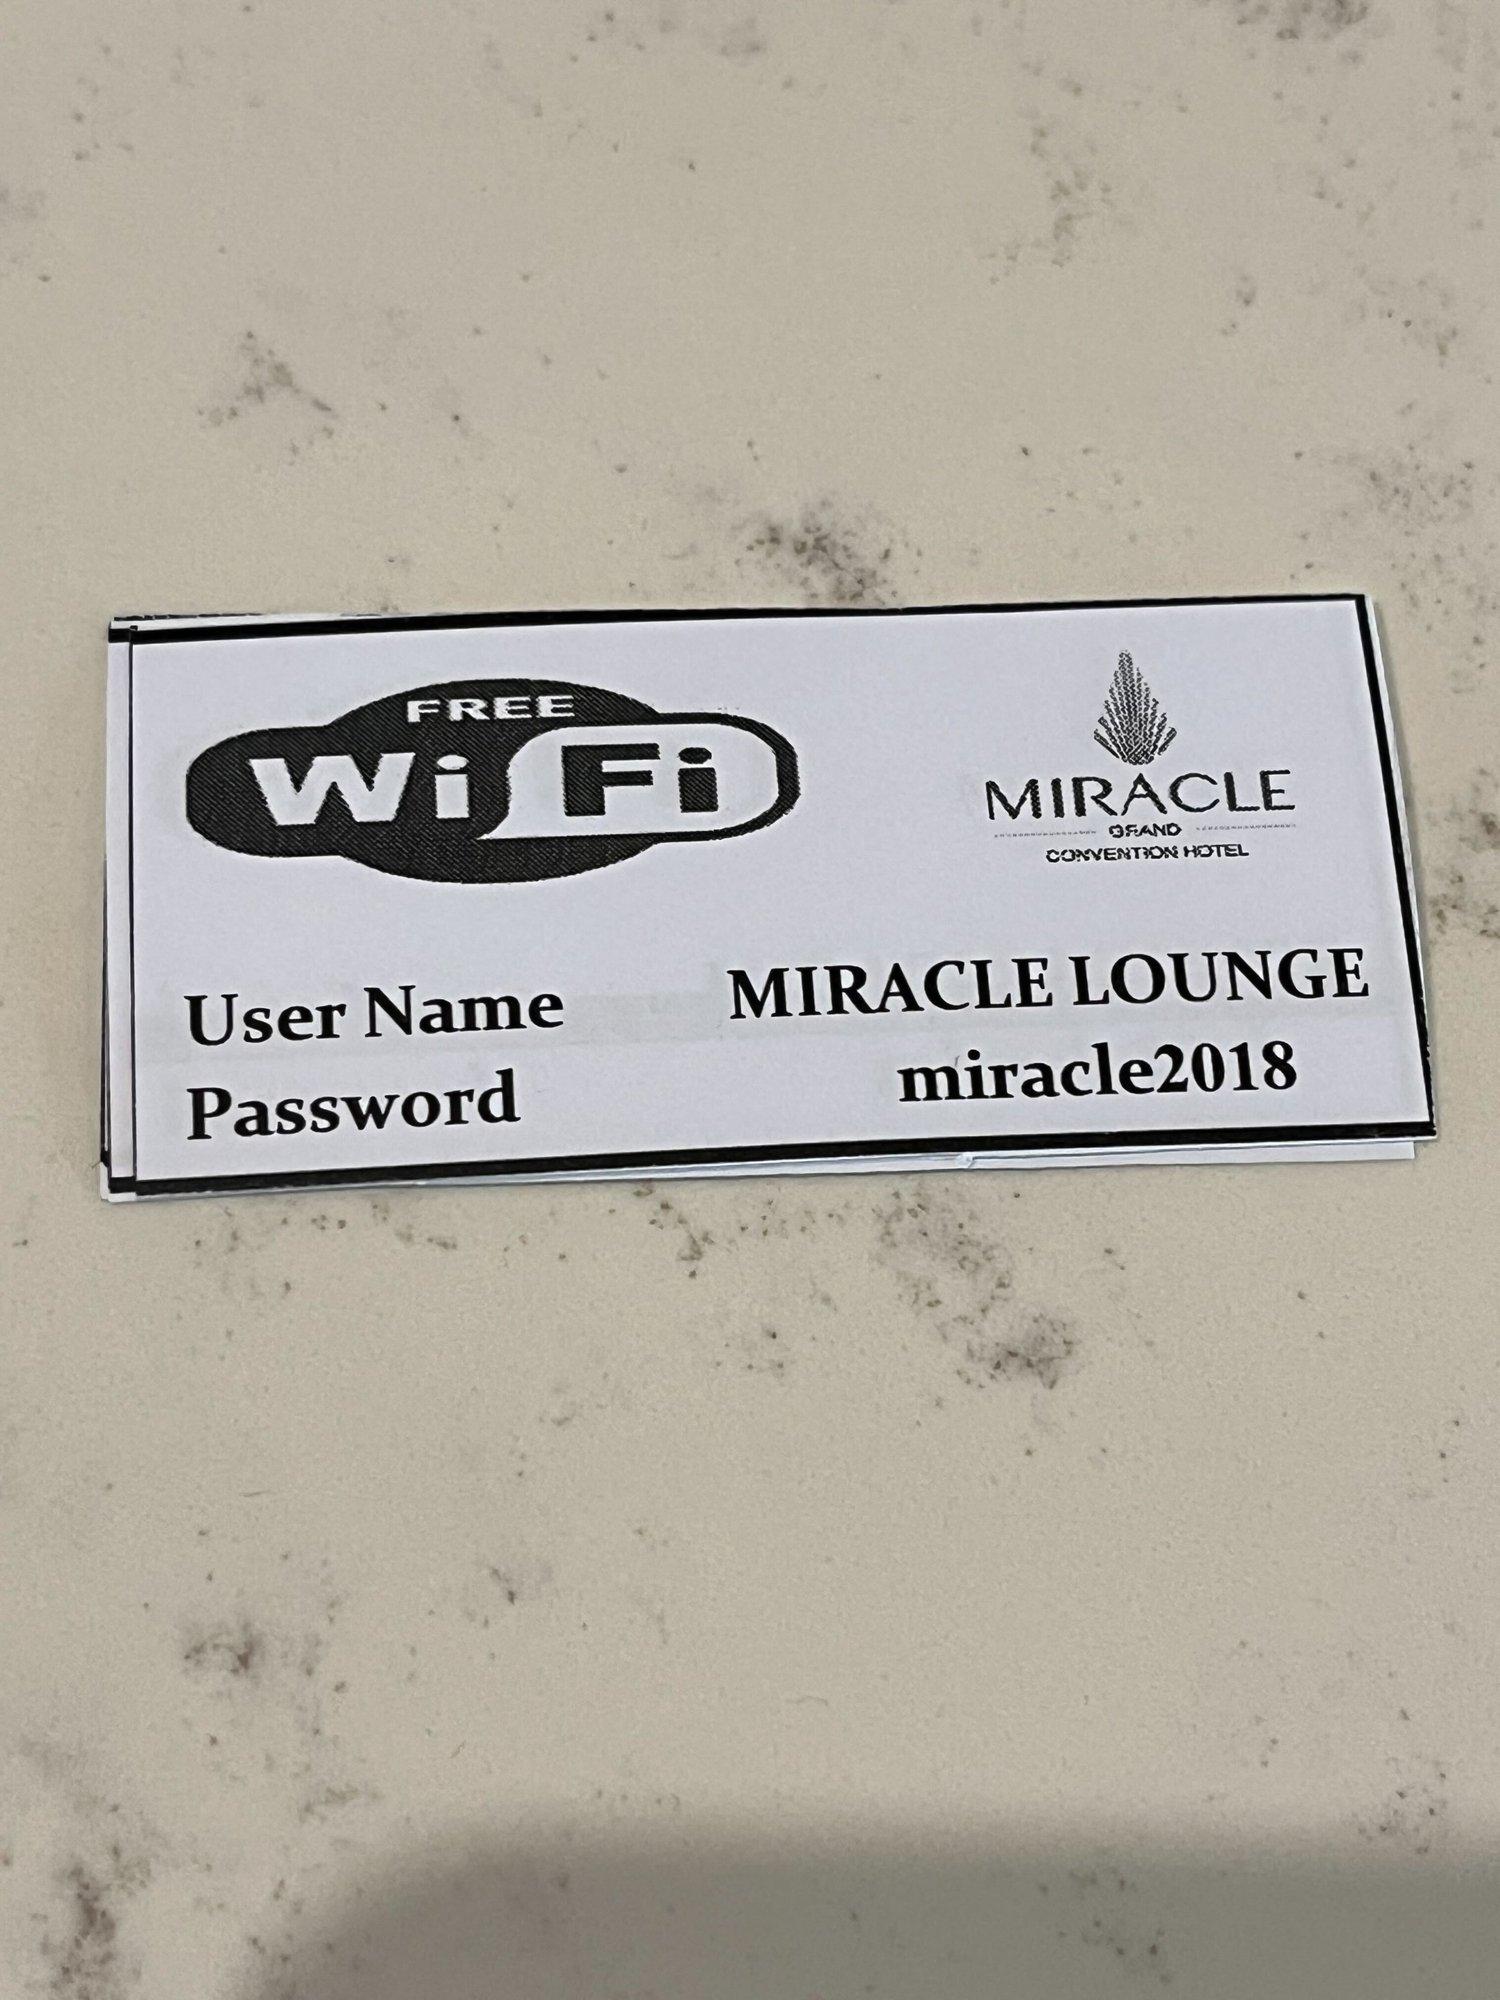 Miracle Lounge image 38 of 59